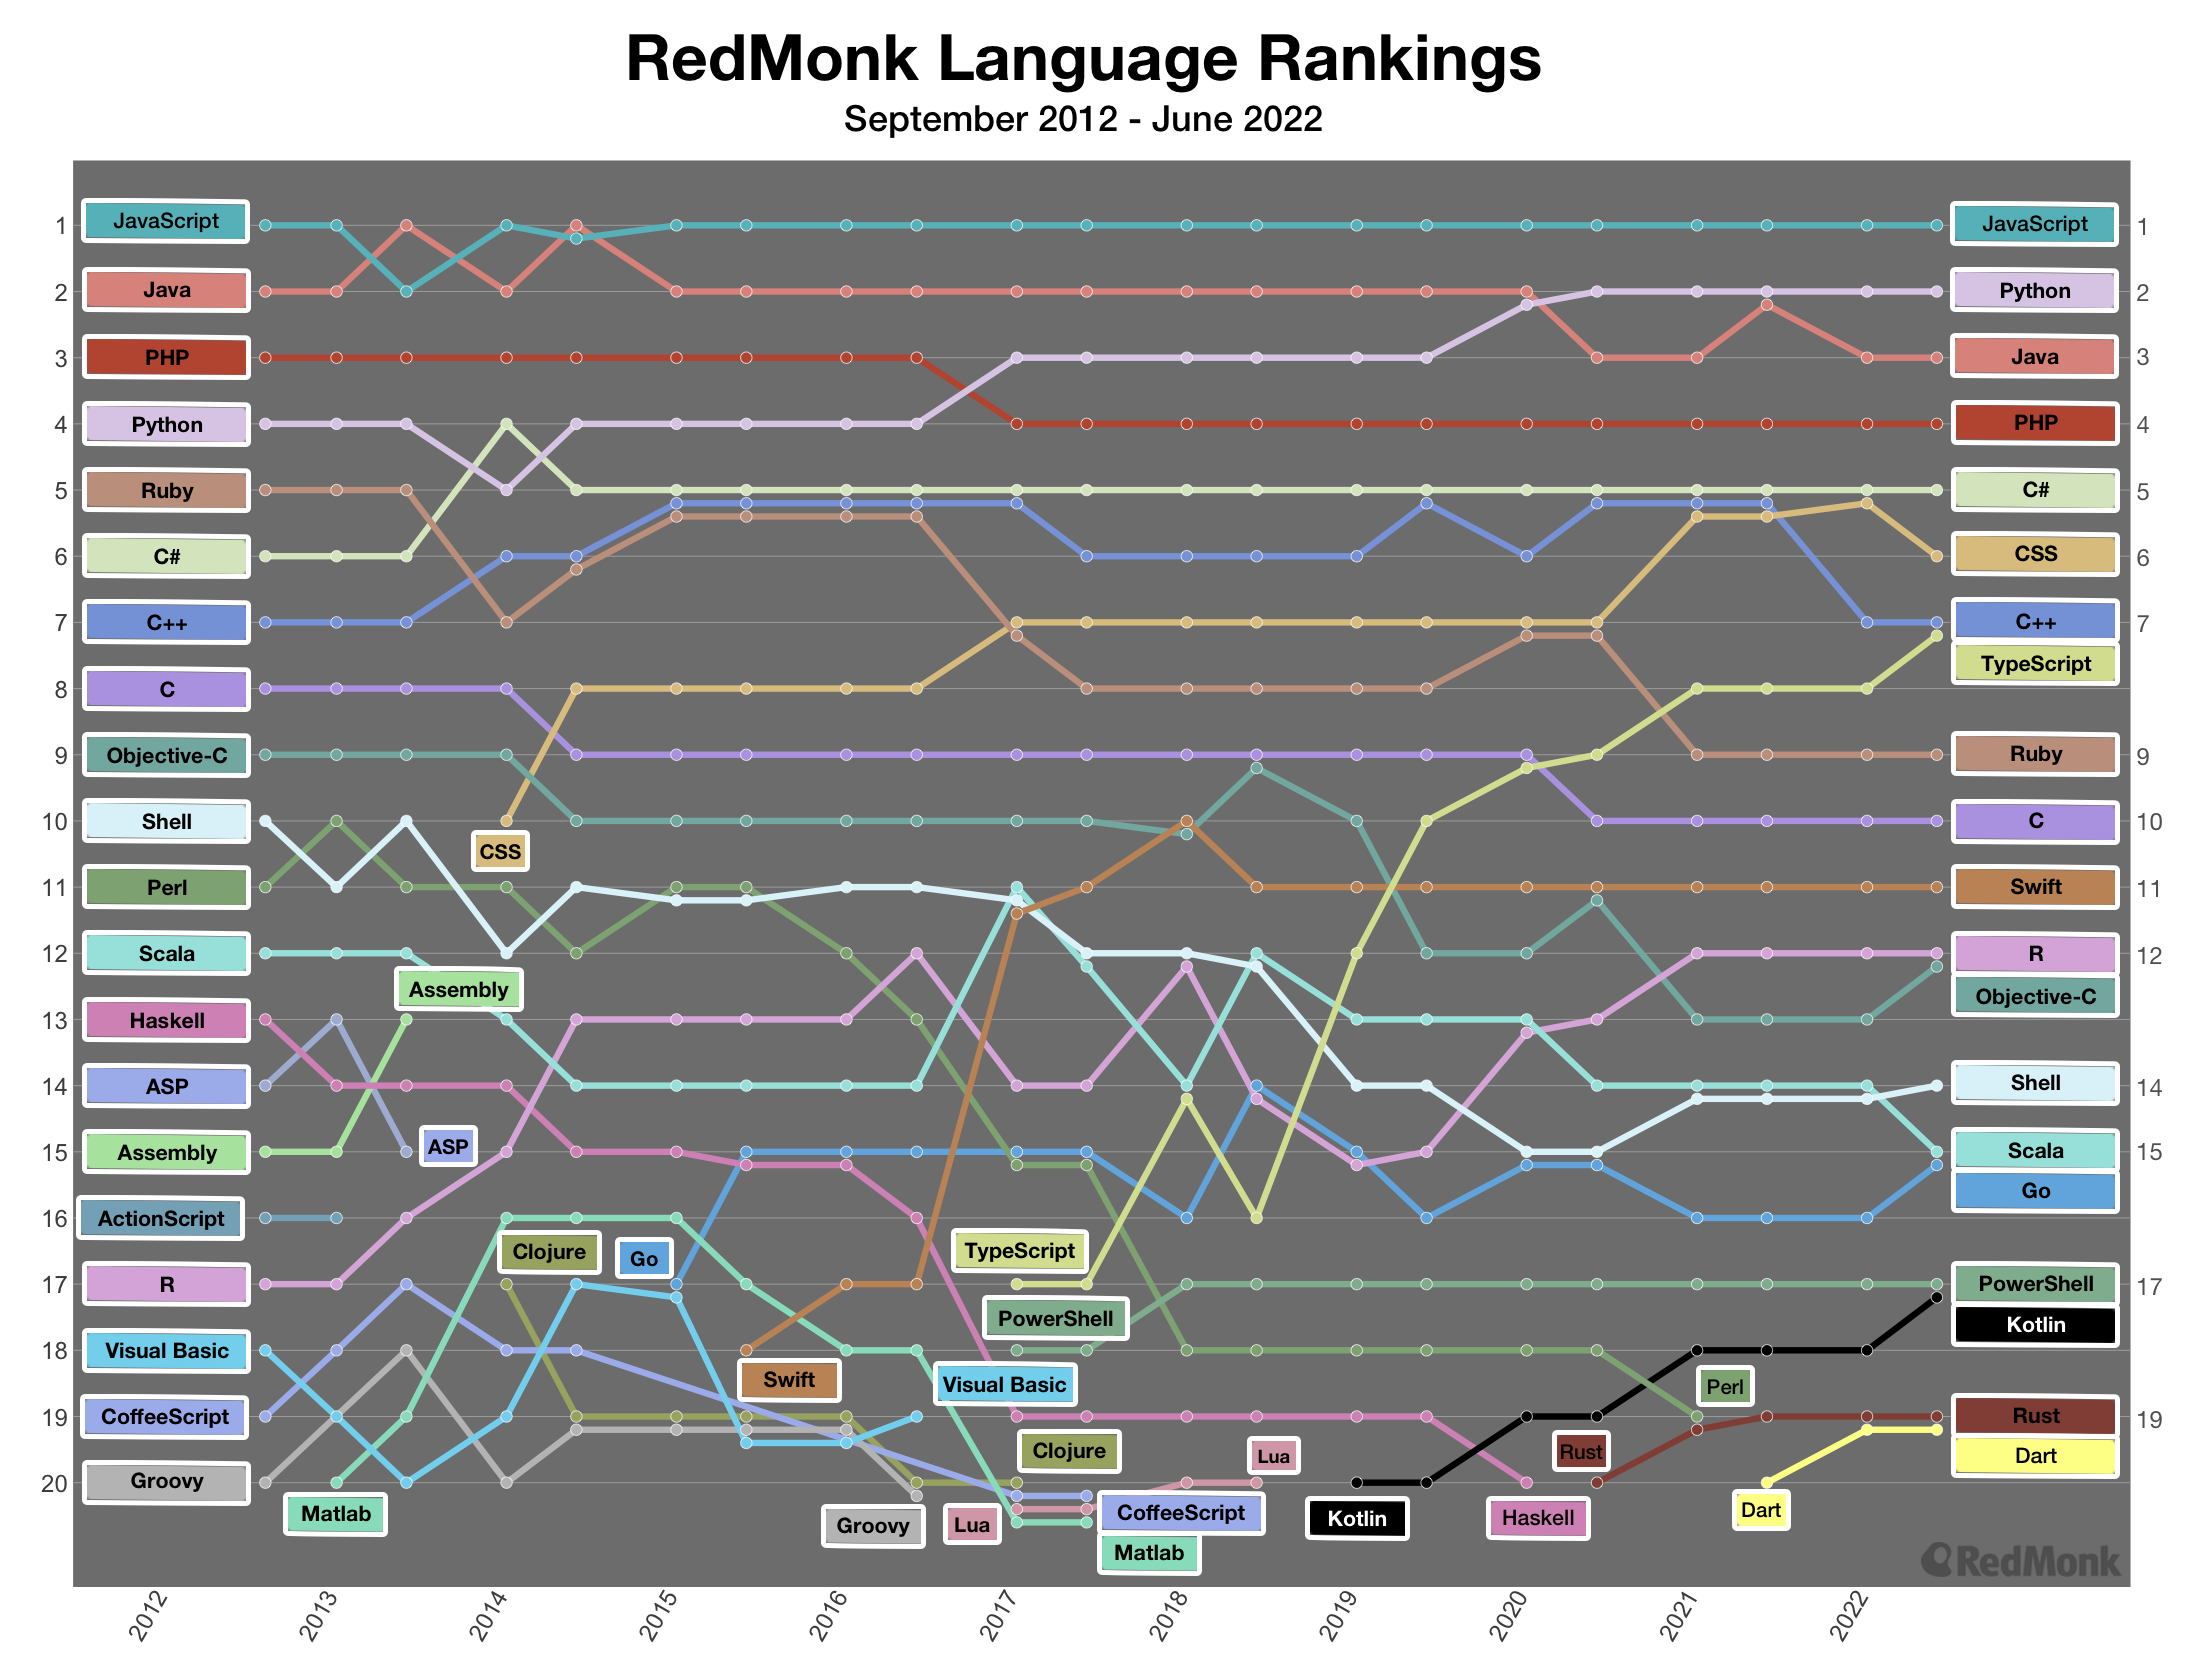 Top 20 languages over time. X-axis shows time ranging from 2012 to 2022. y-axis shows ranks 1-20. languages are plotted by rank for each semi-annual iteration of the rankings.